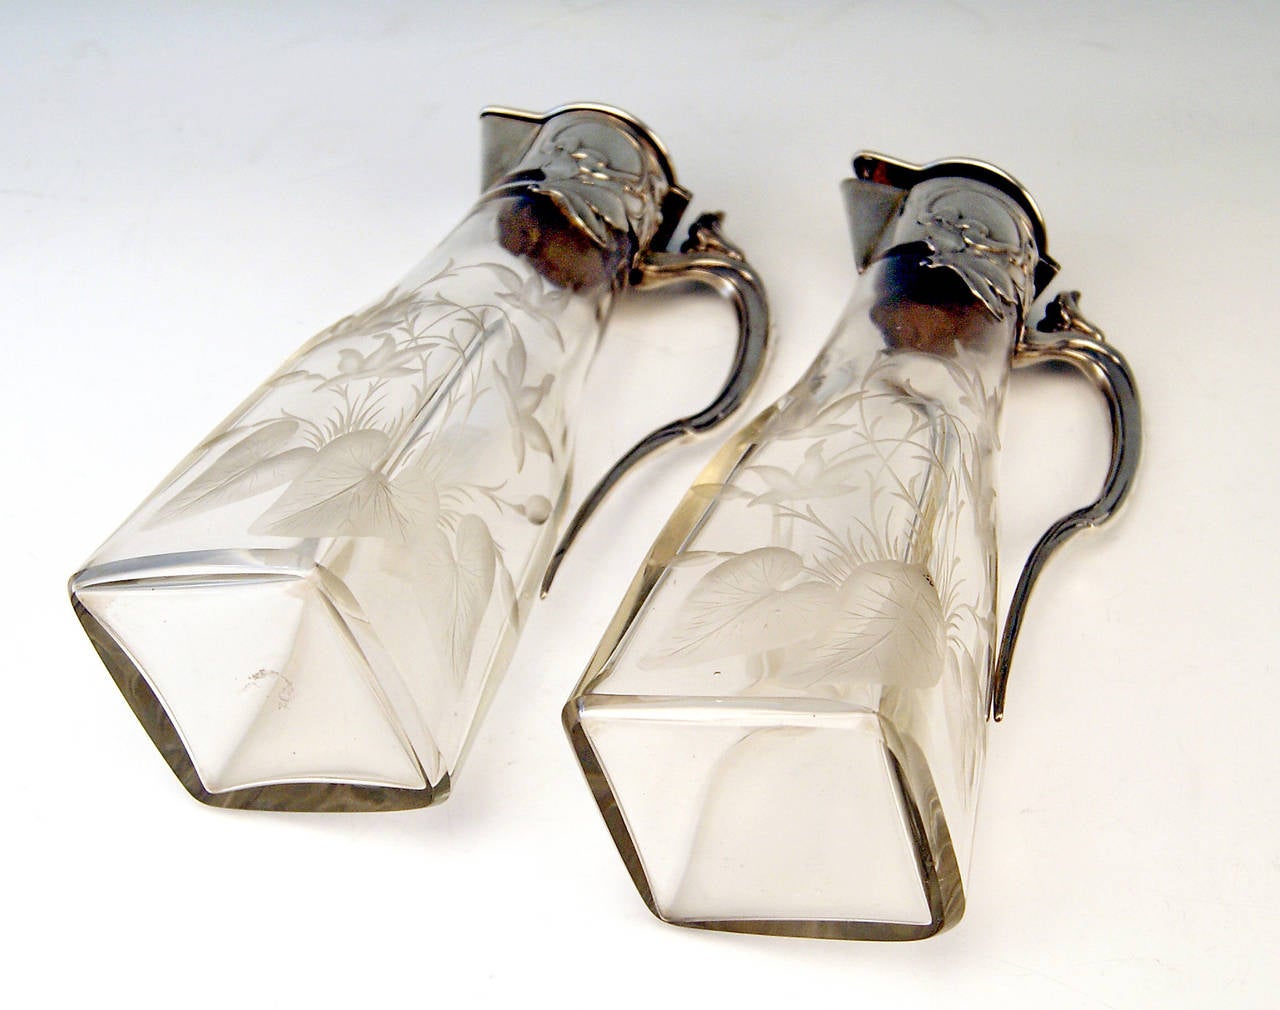 Early 20th Century Silver Art Nouveau German Pair of Glass Decanters by Otto Wolter, circa 1900